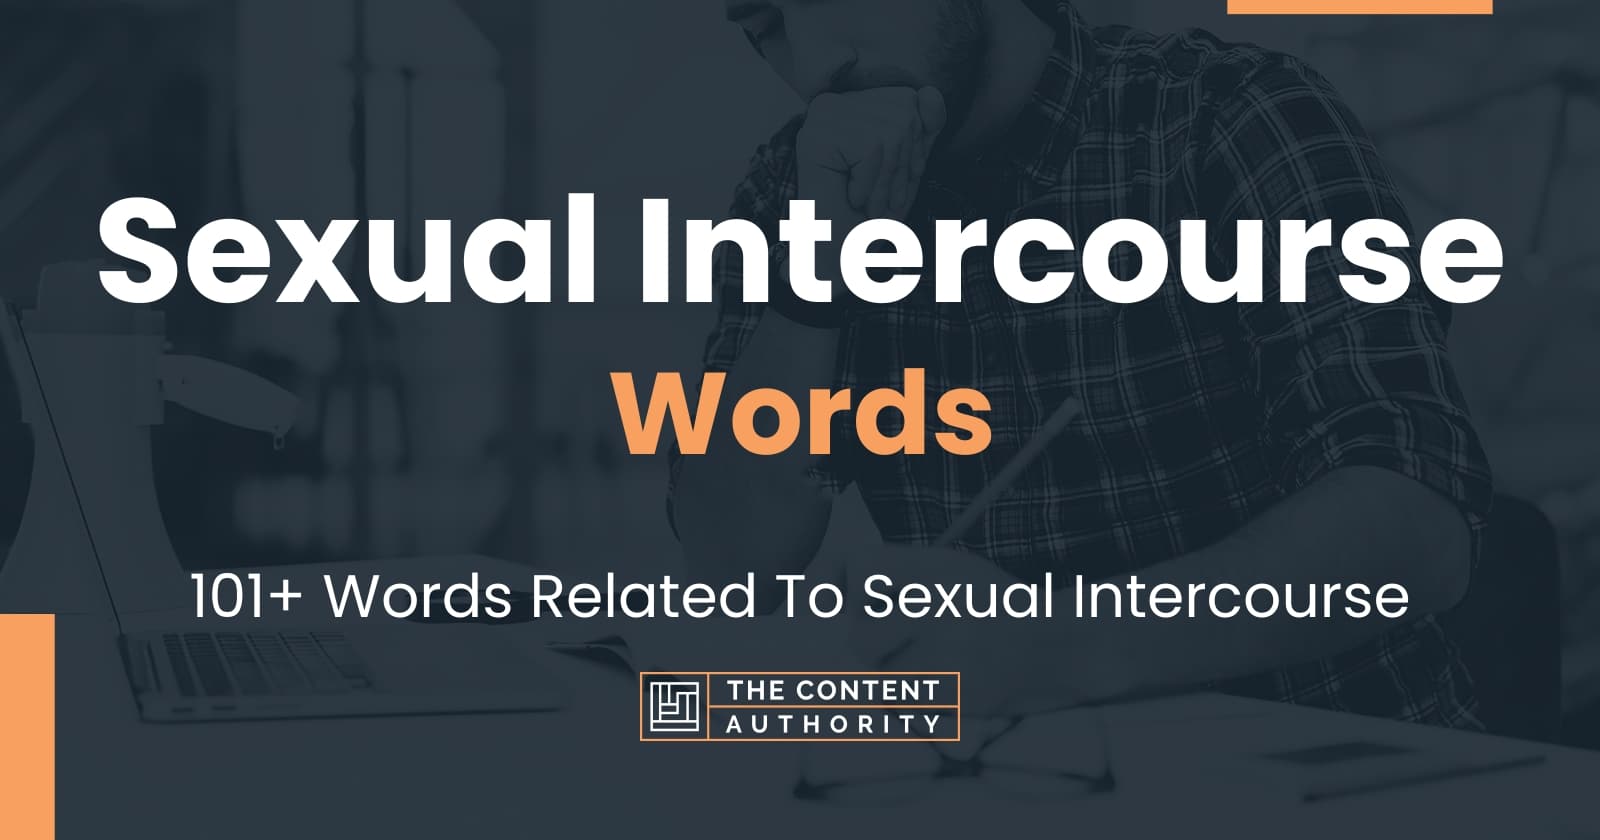 Sexual Intercourse Words 101 Words Related To Sexual Intercourse